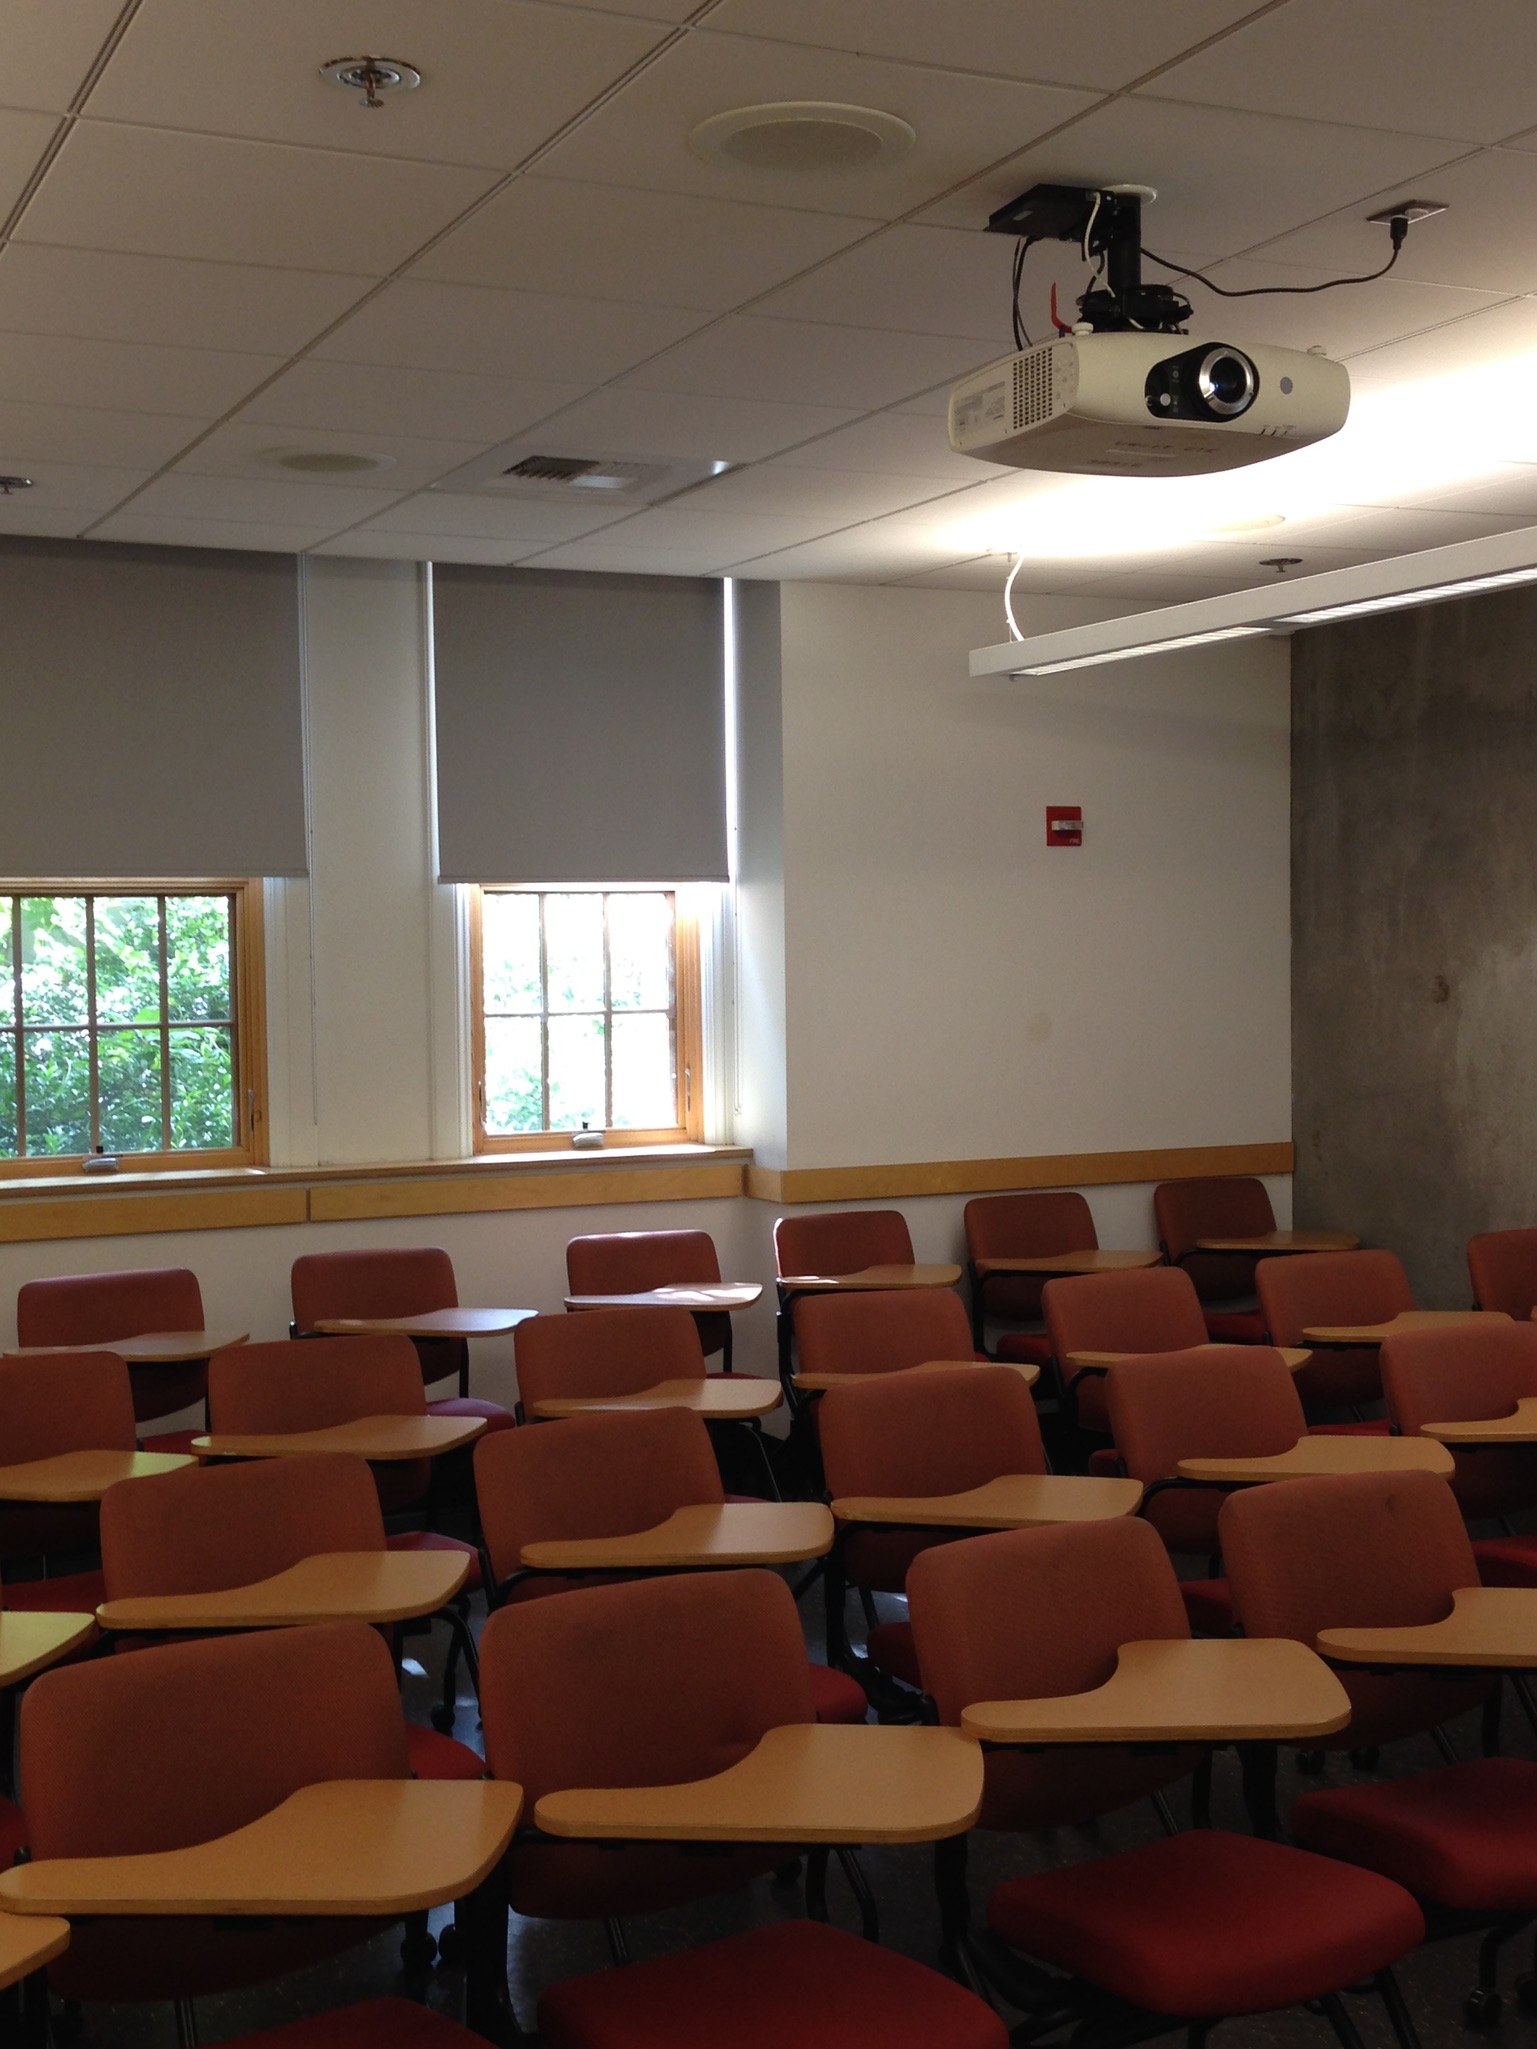 A classroom in the basement of Savery Hall.